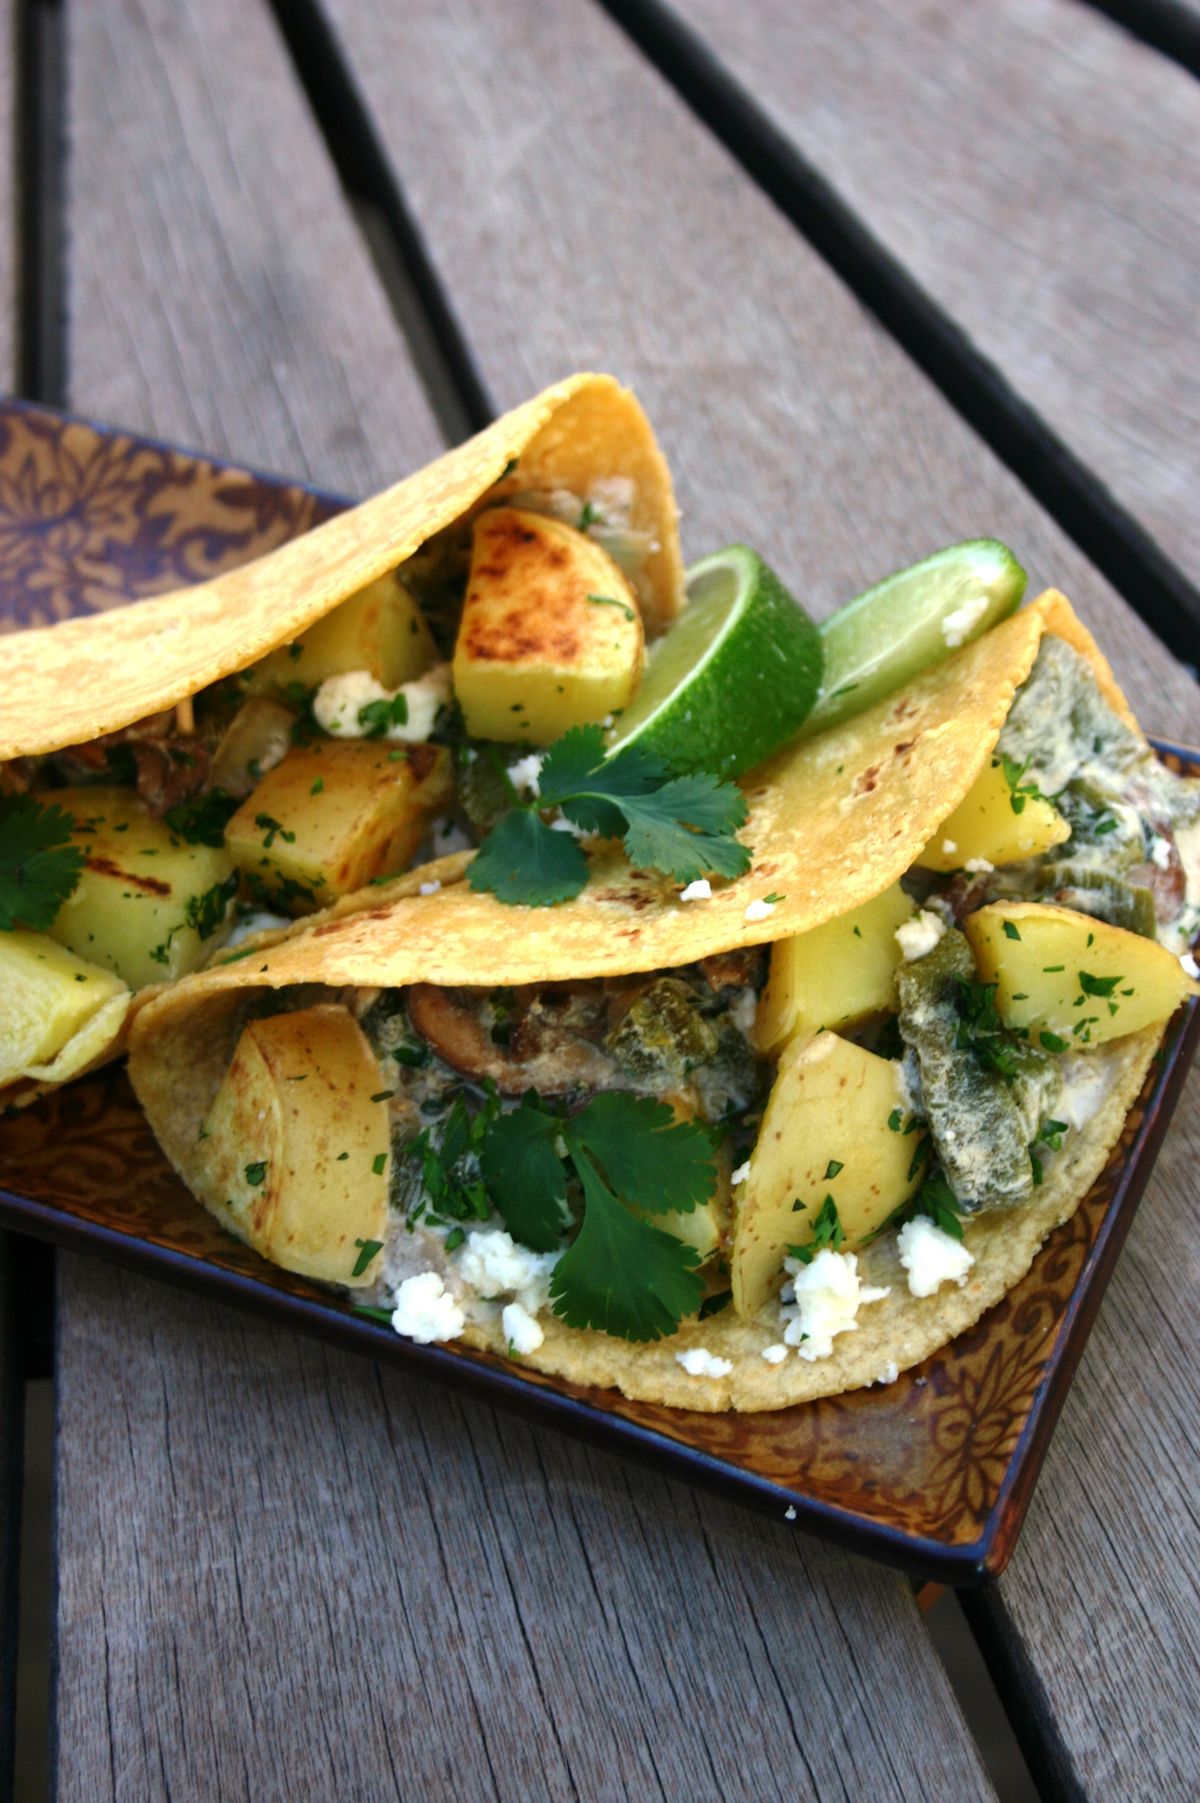 Poblano, mushroom and potato tacos might sound like they’re out of your culinary comfort zone, but they are quick to fix, easy on your budget and delicious. (Lorie Hutson)